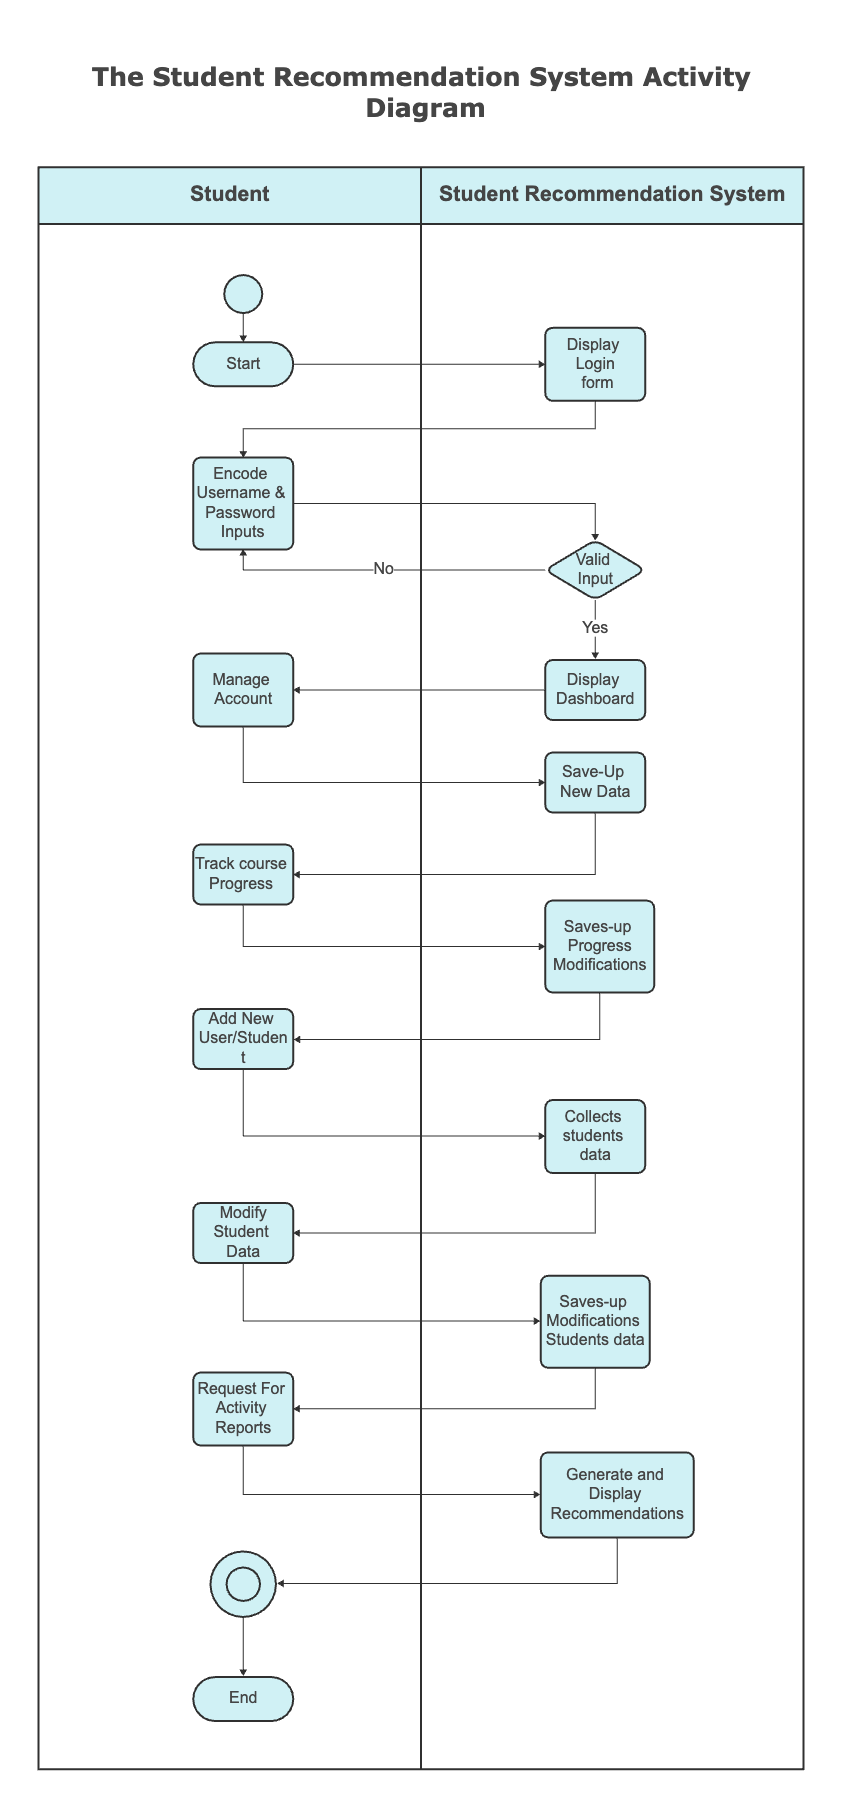 Swimlane Activity Diagram for a Student Recommendation System